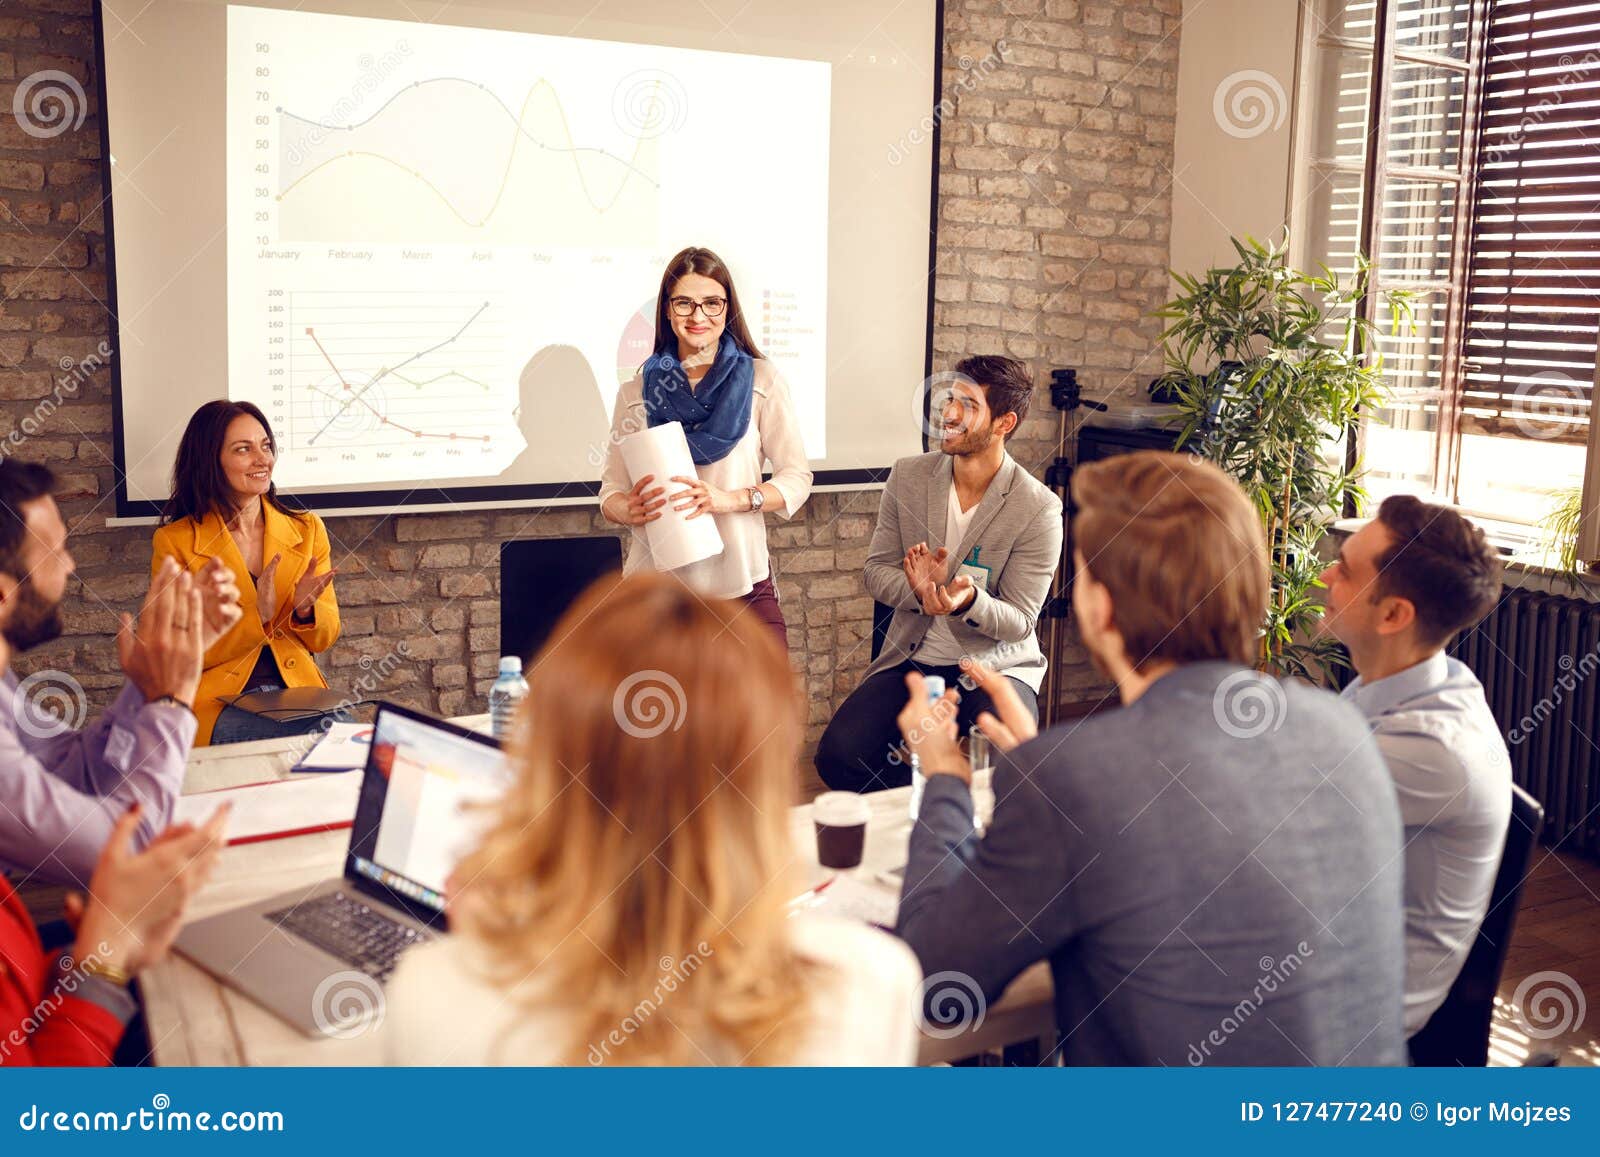 a powerpoint slideshow is an example of a verbal presentation